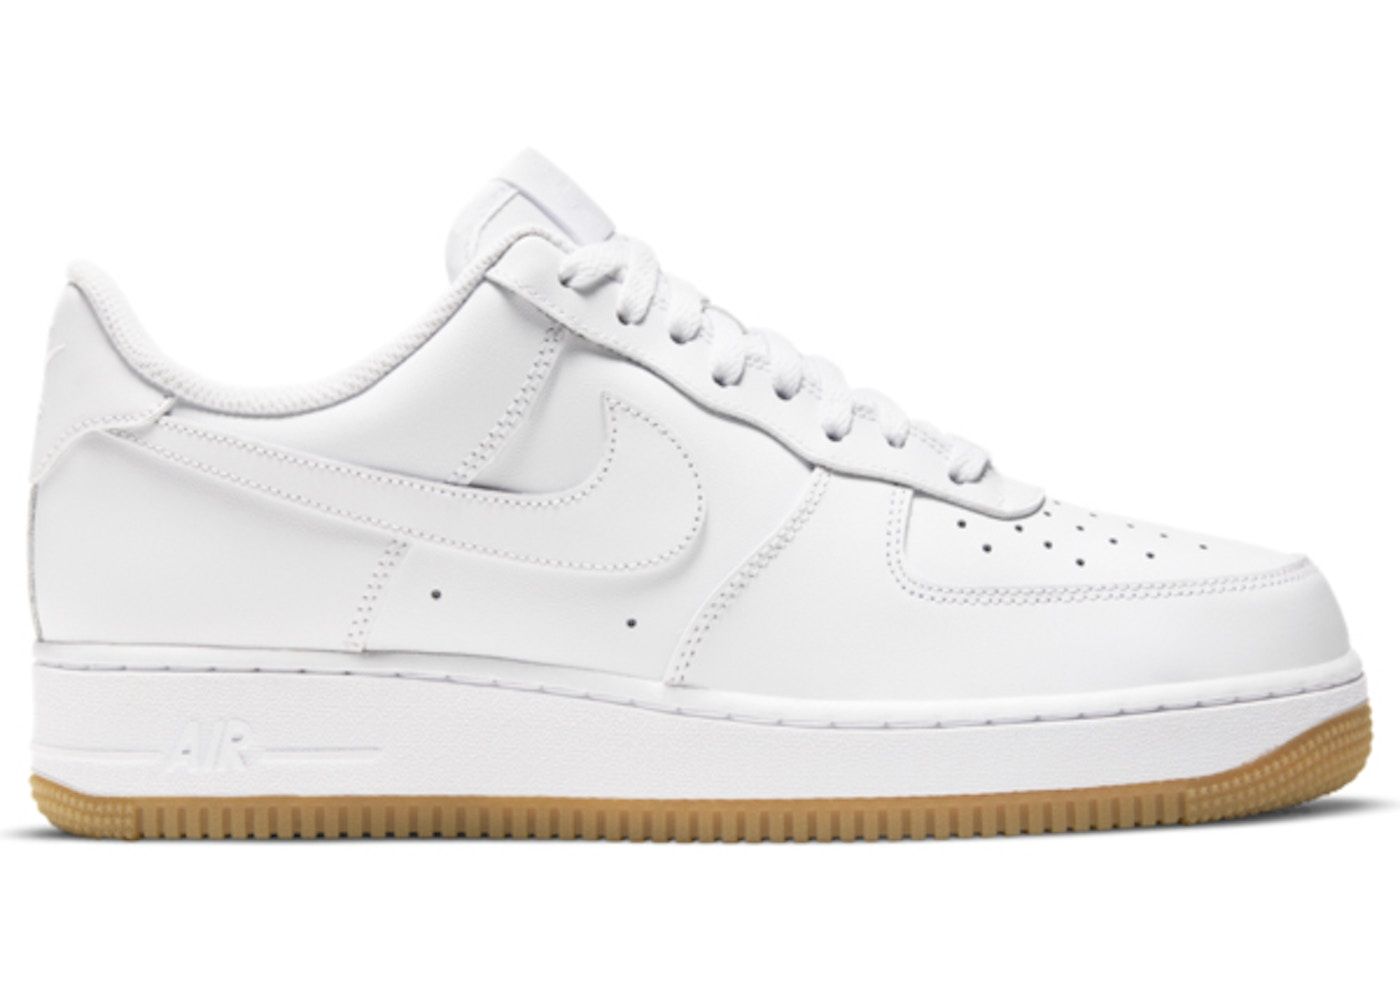 Nike Air Force 1 Low White Gum | StockX